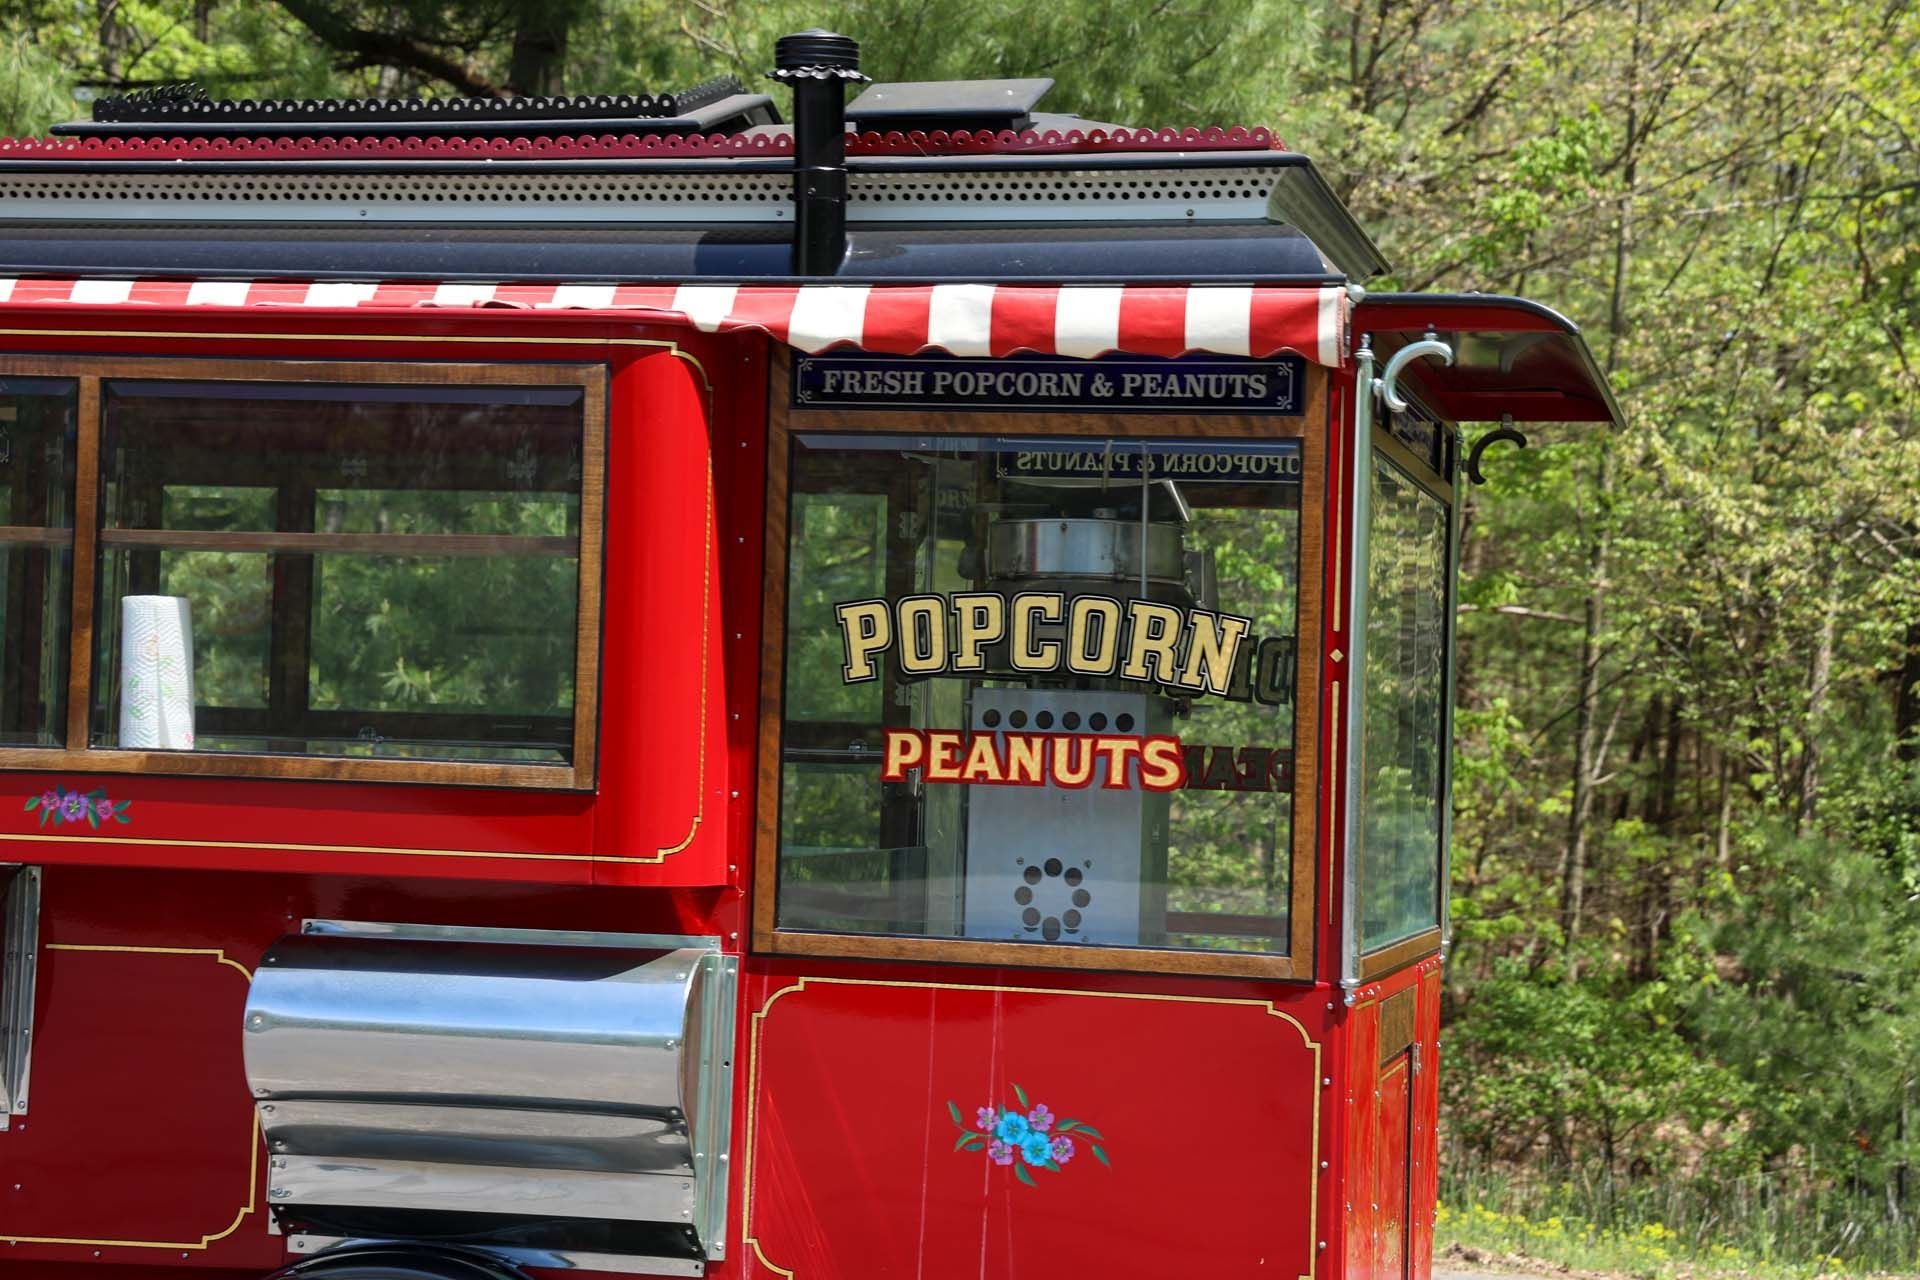 Broad Arrow Auctions | 1929 Ford Model AA Popcorn Truck